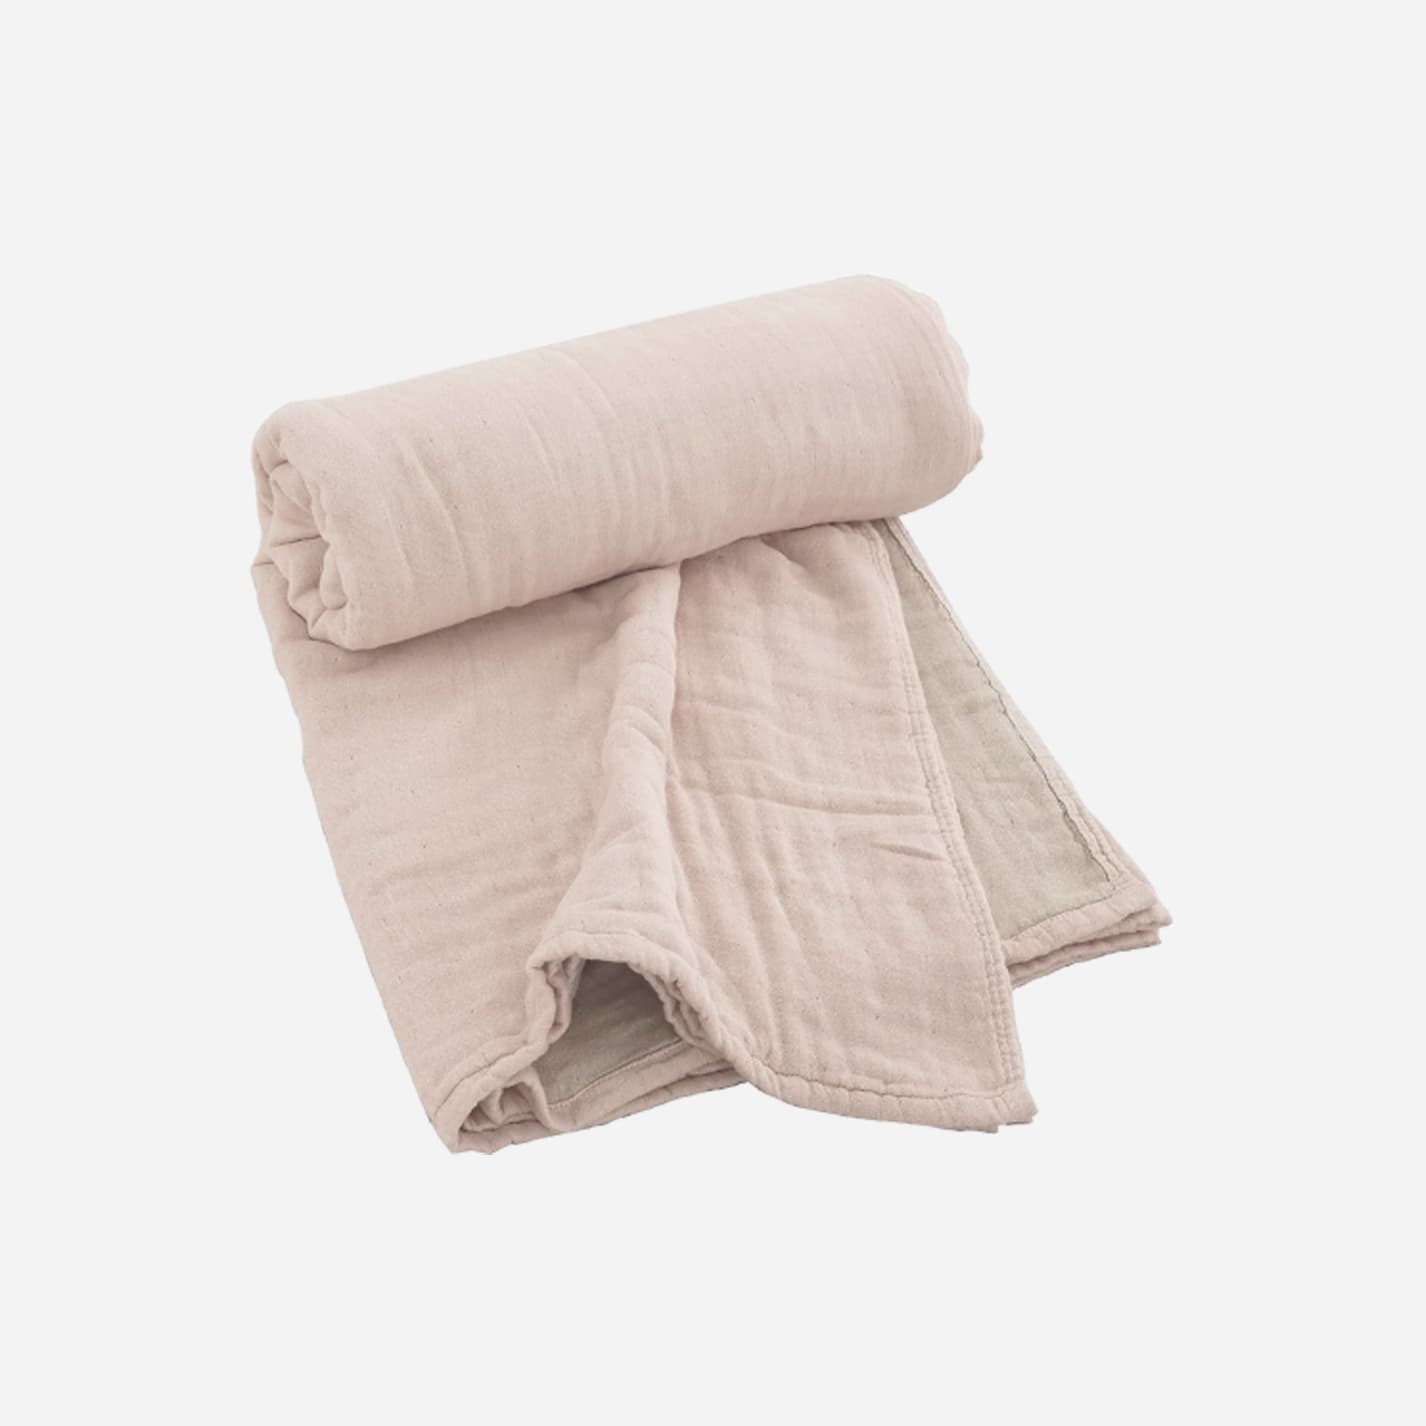 [Le Blanche Light Blanket] 8-layer gauze towel blanket with cashmere